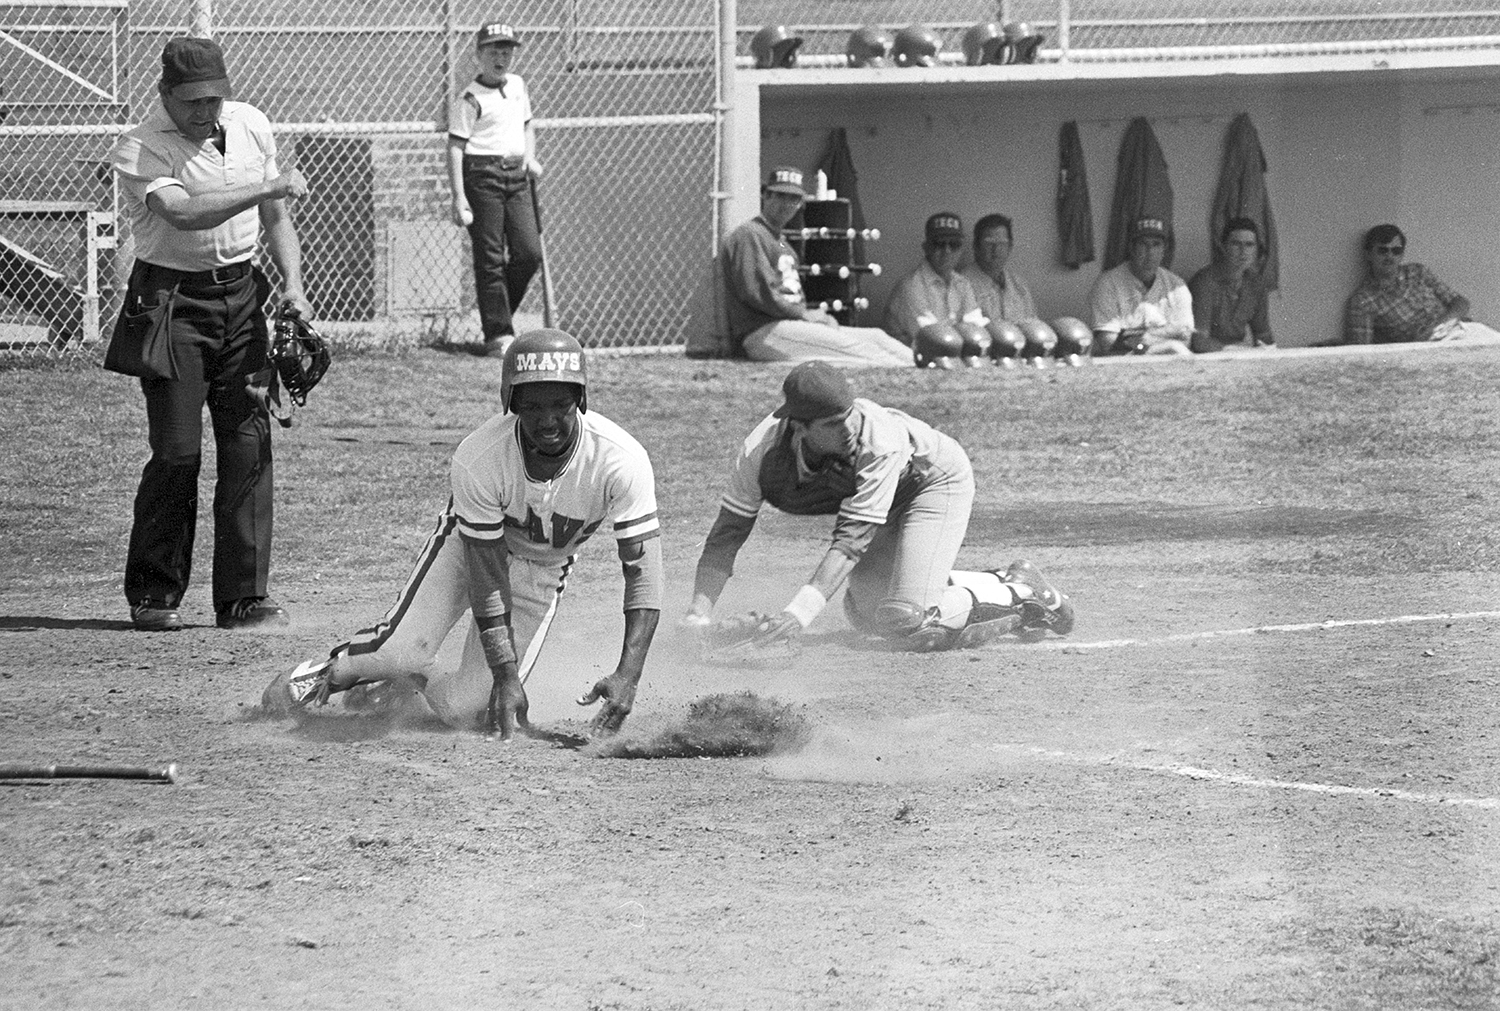 Black and white photo of a man sliding into first base at a baseball game. There is a catcher on his knees attempting to tag the player out. There is an umpire standing just behind them.